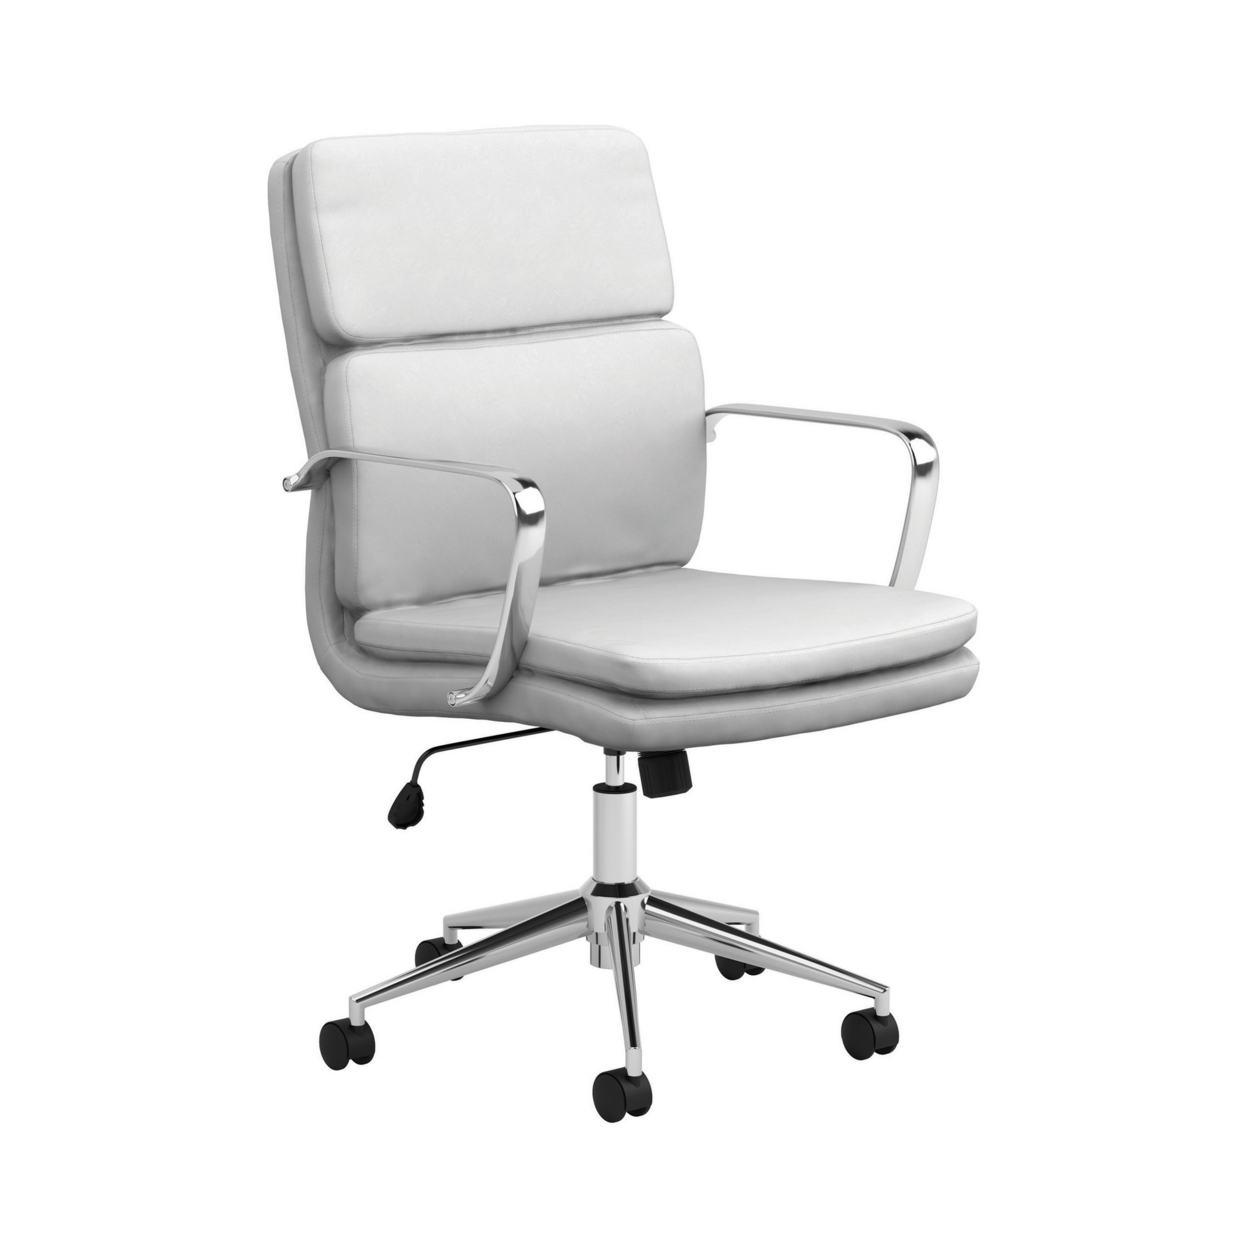 Leatherette Office Chair With Top Panel Padded Back, Gray- Saltoro Sherpi